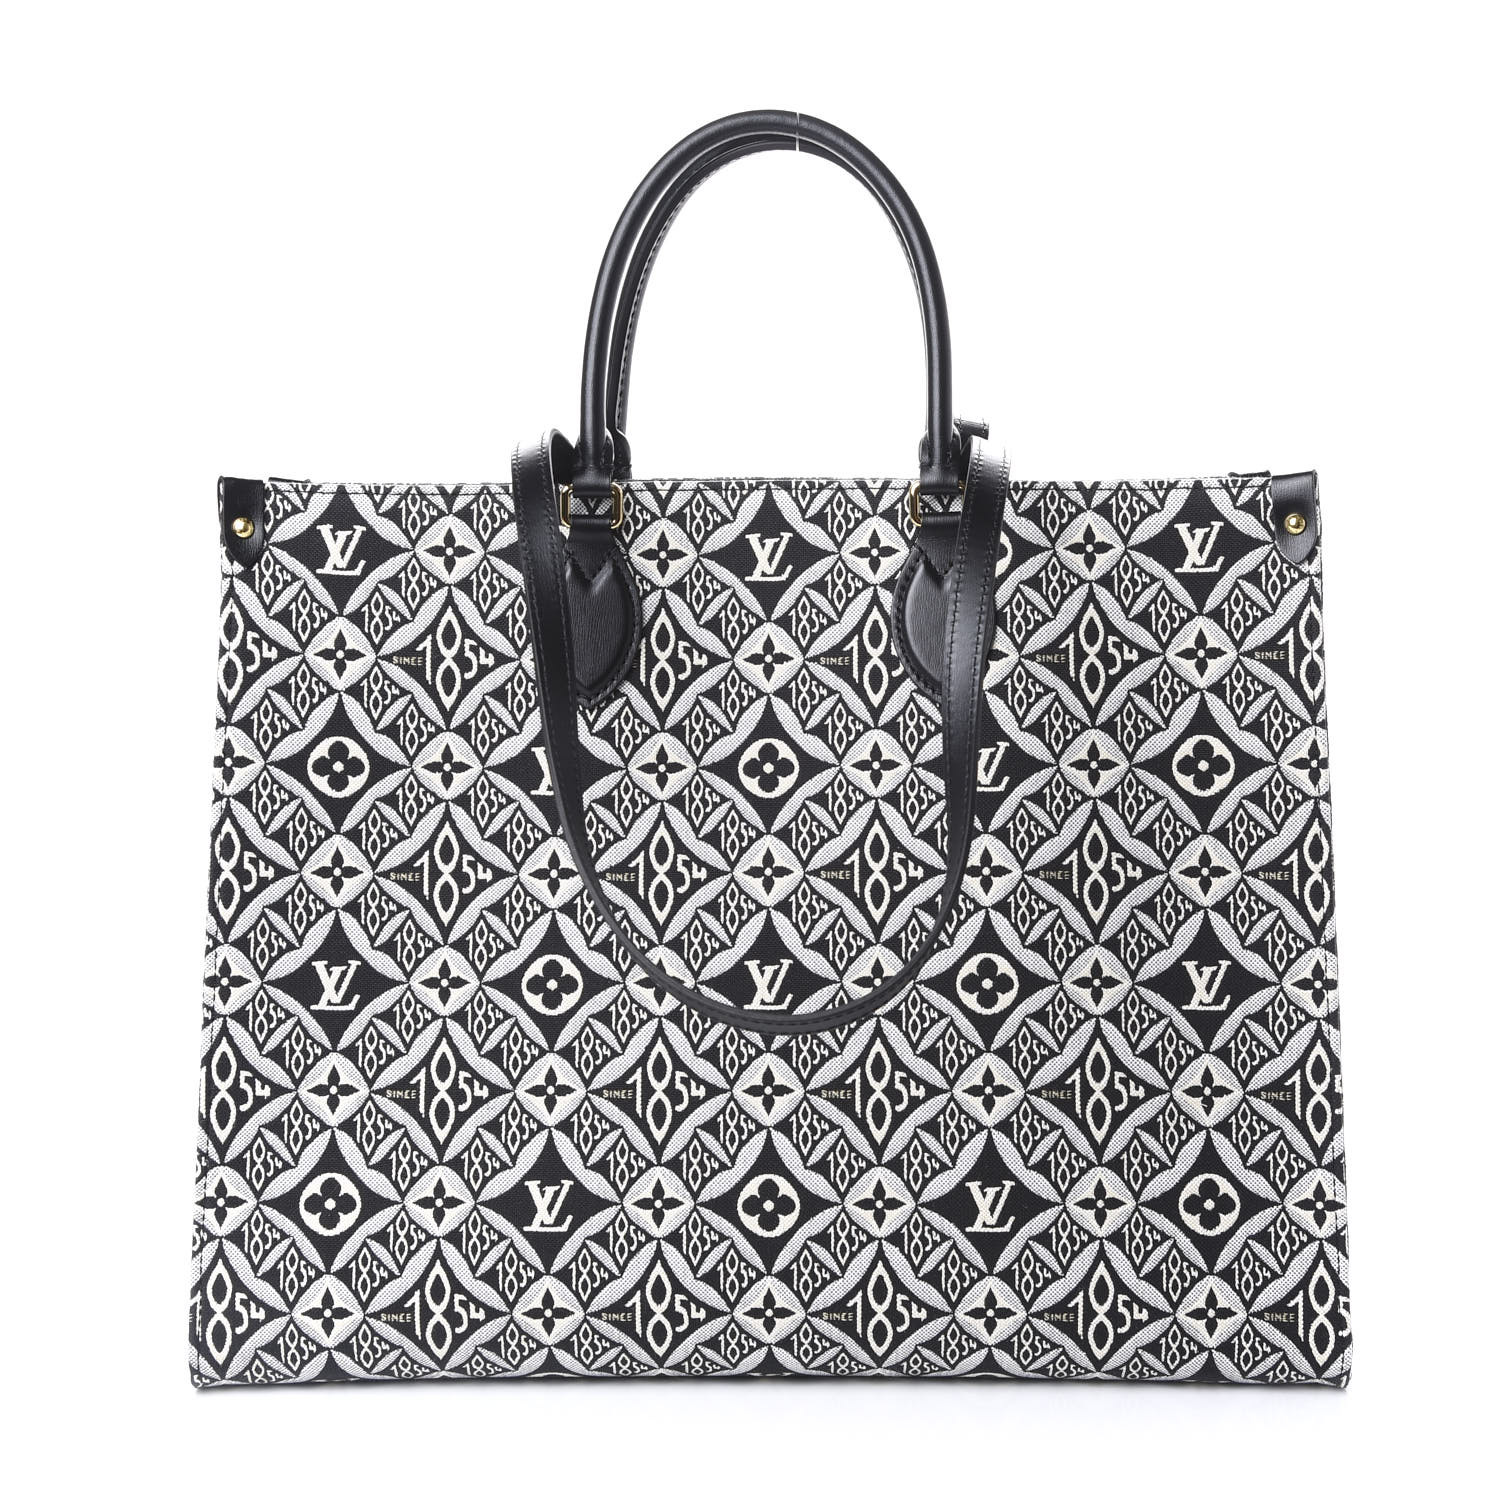 LOUIS VUITTON SINCE 1854 DAUPHINE GRAY PURSE - Replica Bags and Shoes  online Store - AlimorLuxury